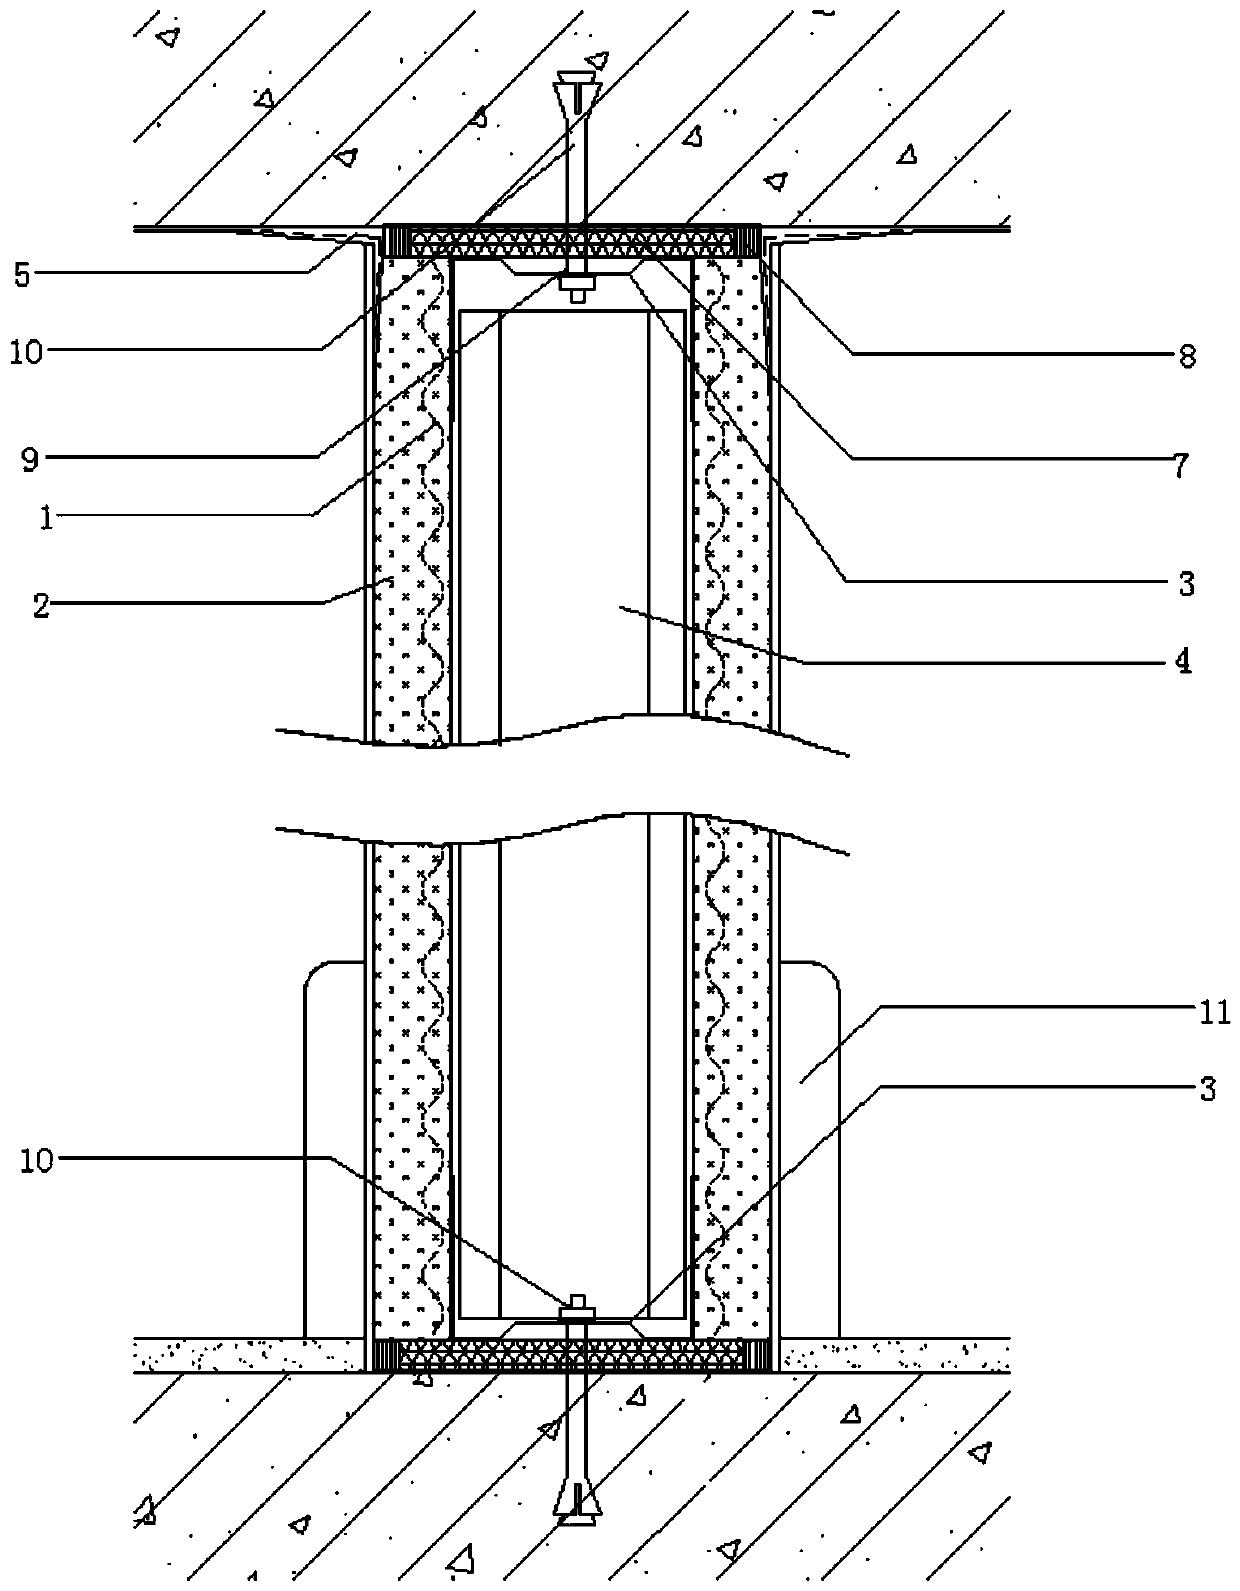 Partition wall-wall connection structure